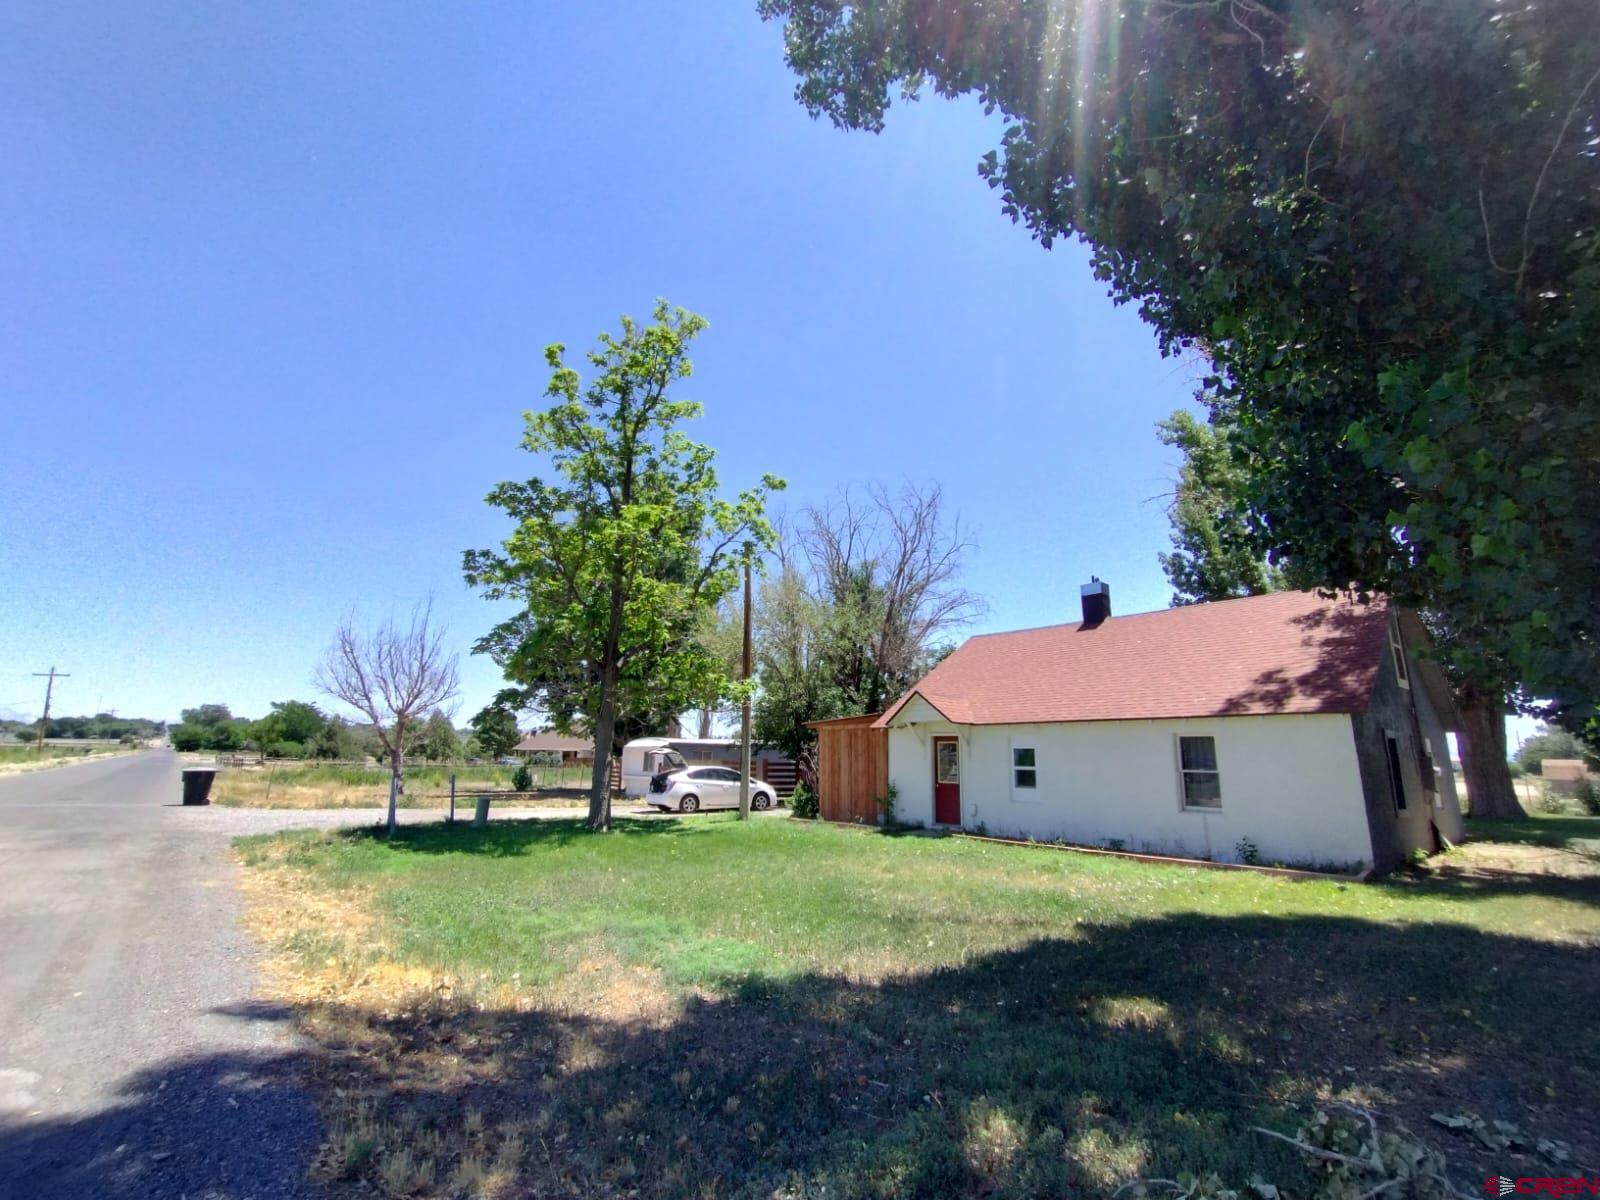 3/2 Home + a 2/1 rental mobile on 1.1 acres.  STABLE - INCOME PRODUCING 2 UNITS on 1.1 acres. FULLY OCCUPIED - DO NOT DISTURB TENANT month to month leases. Live in one residence and rent out the other? The Main stick built adobe home (1020 16th st ) is 1, 392 feet (3 /2) 2 stories - newer flooring, newer paint, newer $4000 furnace, and new hot water heater! Lots of upgrades!  The 1st rental/mobile (1010 16th st)  Main home has 2 upstairs bedrooms, but the master bedroom and master bath are on the main floor. 804 SF 2/1. New Flooring, Paint, Roof re-coated . Both units have W/D hookups and exterior storage sheds. Remodeled 2020. 2 sewer and 2 water taps (15k plus value) . Tenants pay their own electric, gas, water, sewer, trash.  2 separate addresses. ( 2 showers in home, no tub) Rent/income monthly currently is 2,050 a month combined.  2 out NEW hot water heaters, new stone and wood interior upgrades. 2 granite counters. New vanity's! Homes are older but have a vibrant modern feel.  The west border is an alley for private access to the back of the parcel. Irrigation water cuts thru the property, easy for distribution - plenty of water! Some new fencing to help with separation.   Current rents below market.